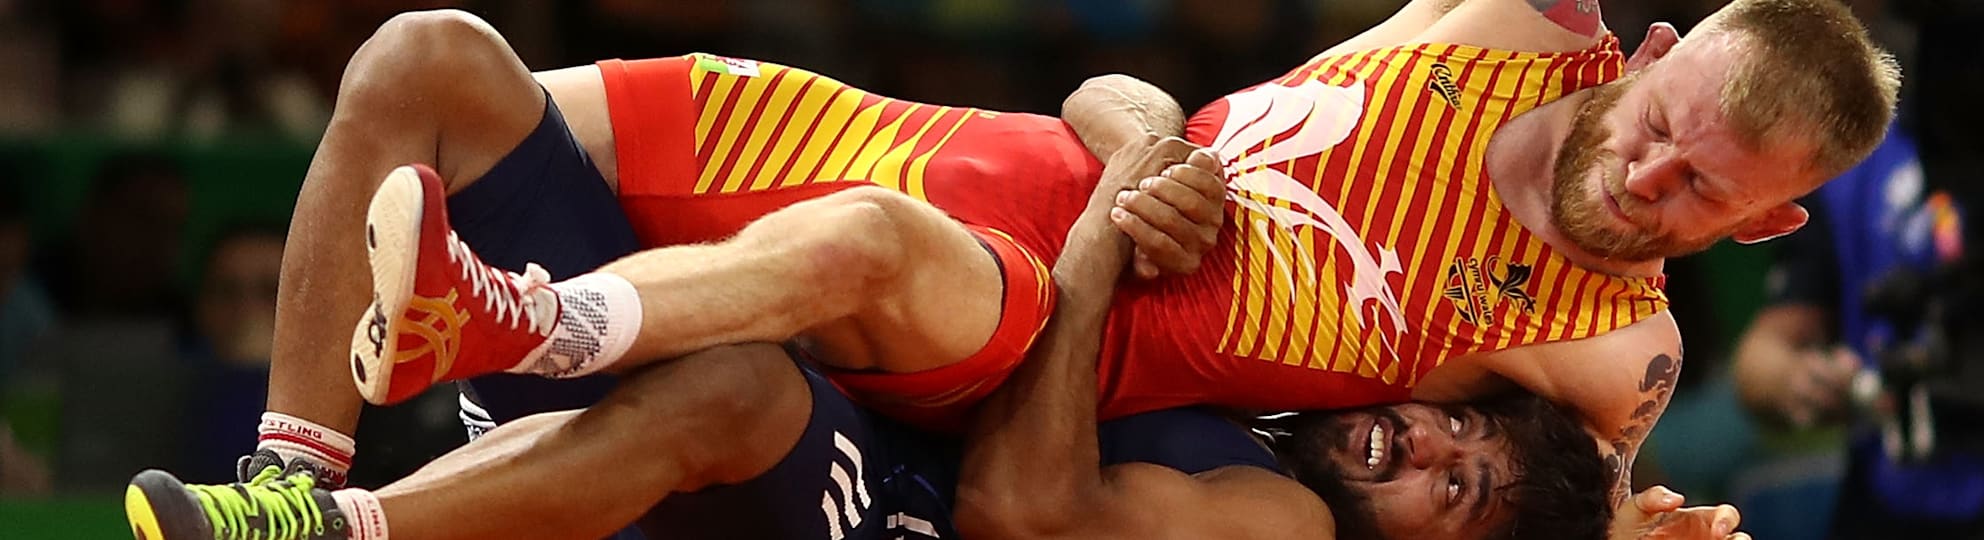 How Can I Watch The World Wrestling Championships In India